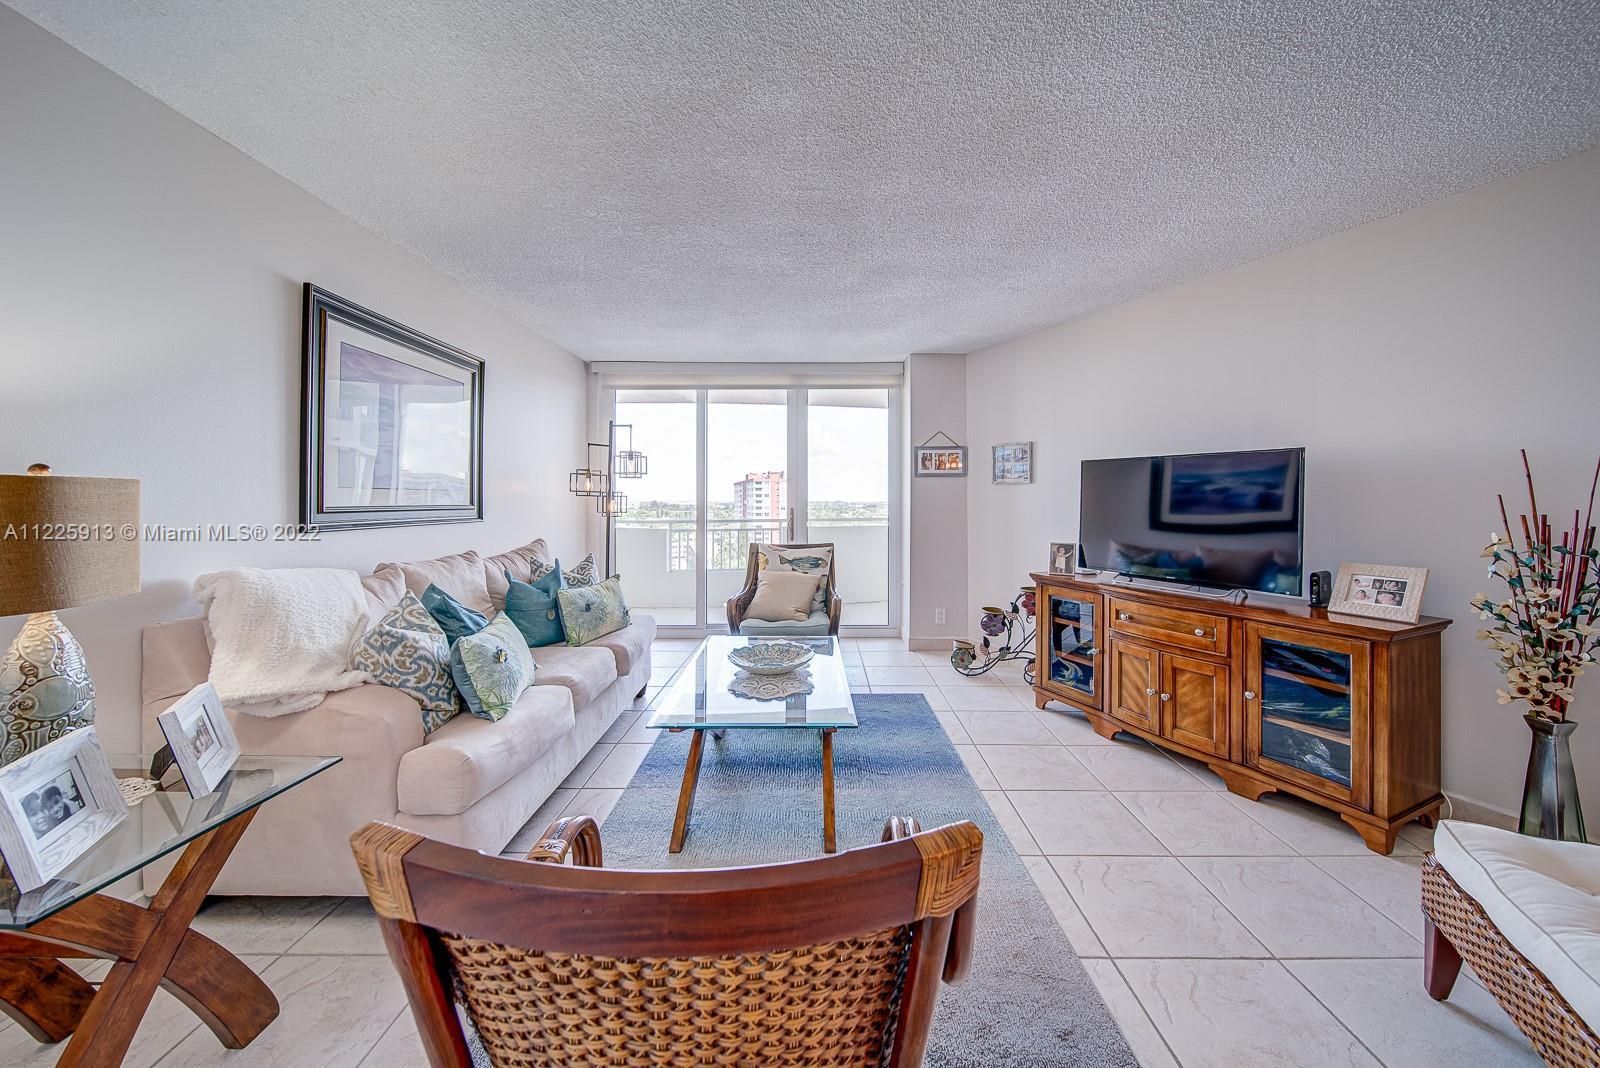 Just listed! Hallandale is on the rise. Welcome to this spacious and cozy 2 bed/2 bathroom beachfron